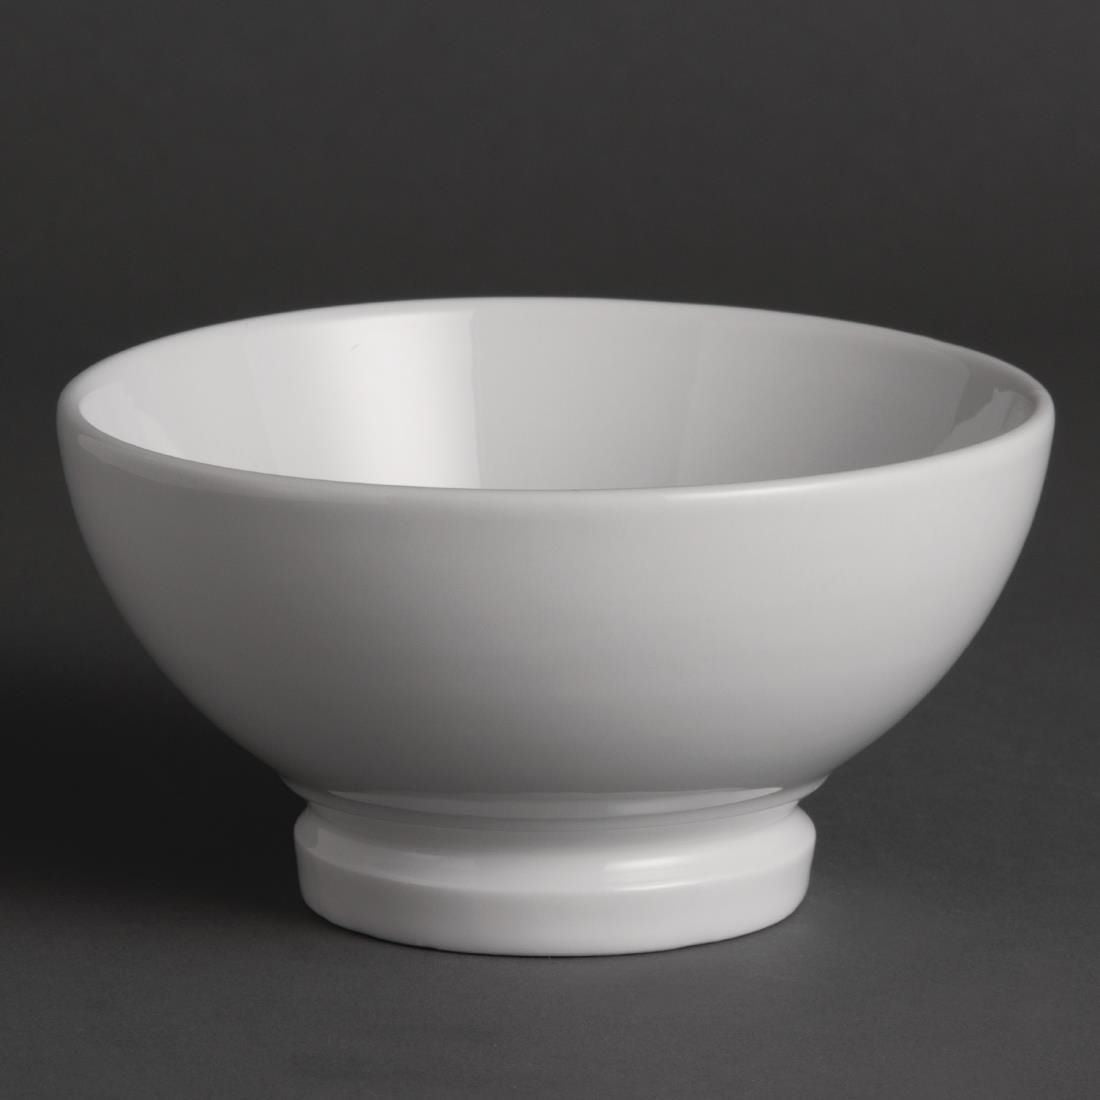 W430 Olympia Whiteware Sevres Bowls 140mm (Pack of 6)